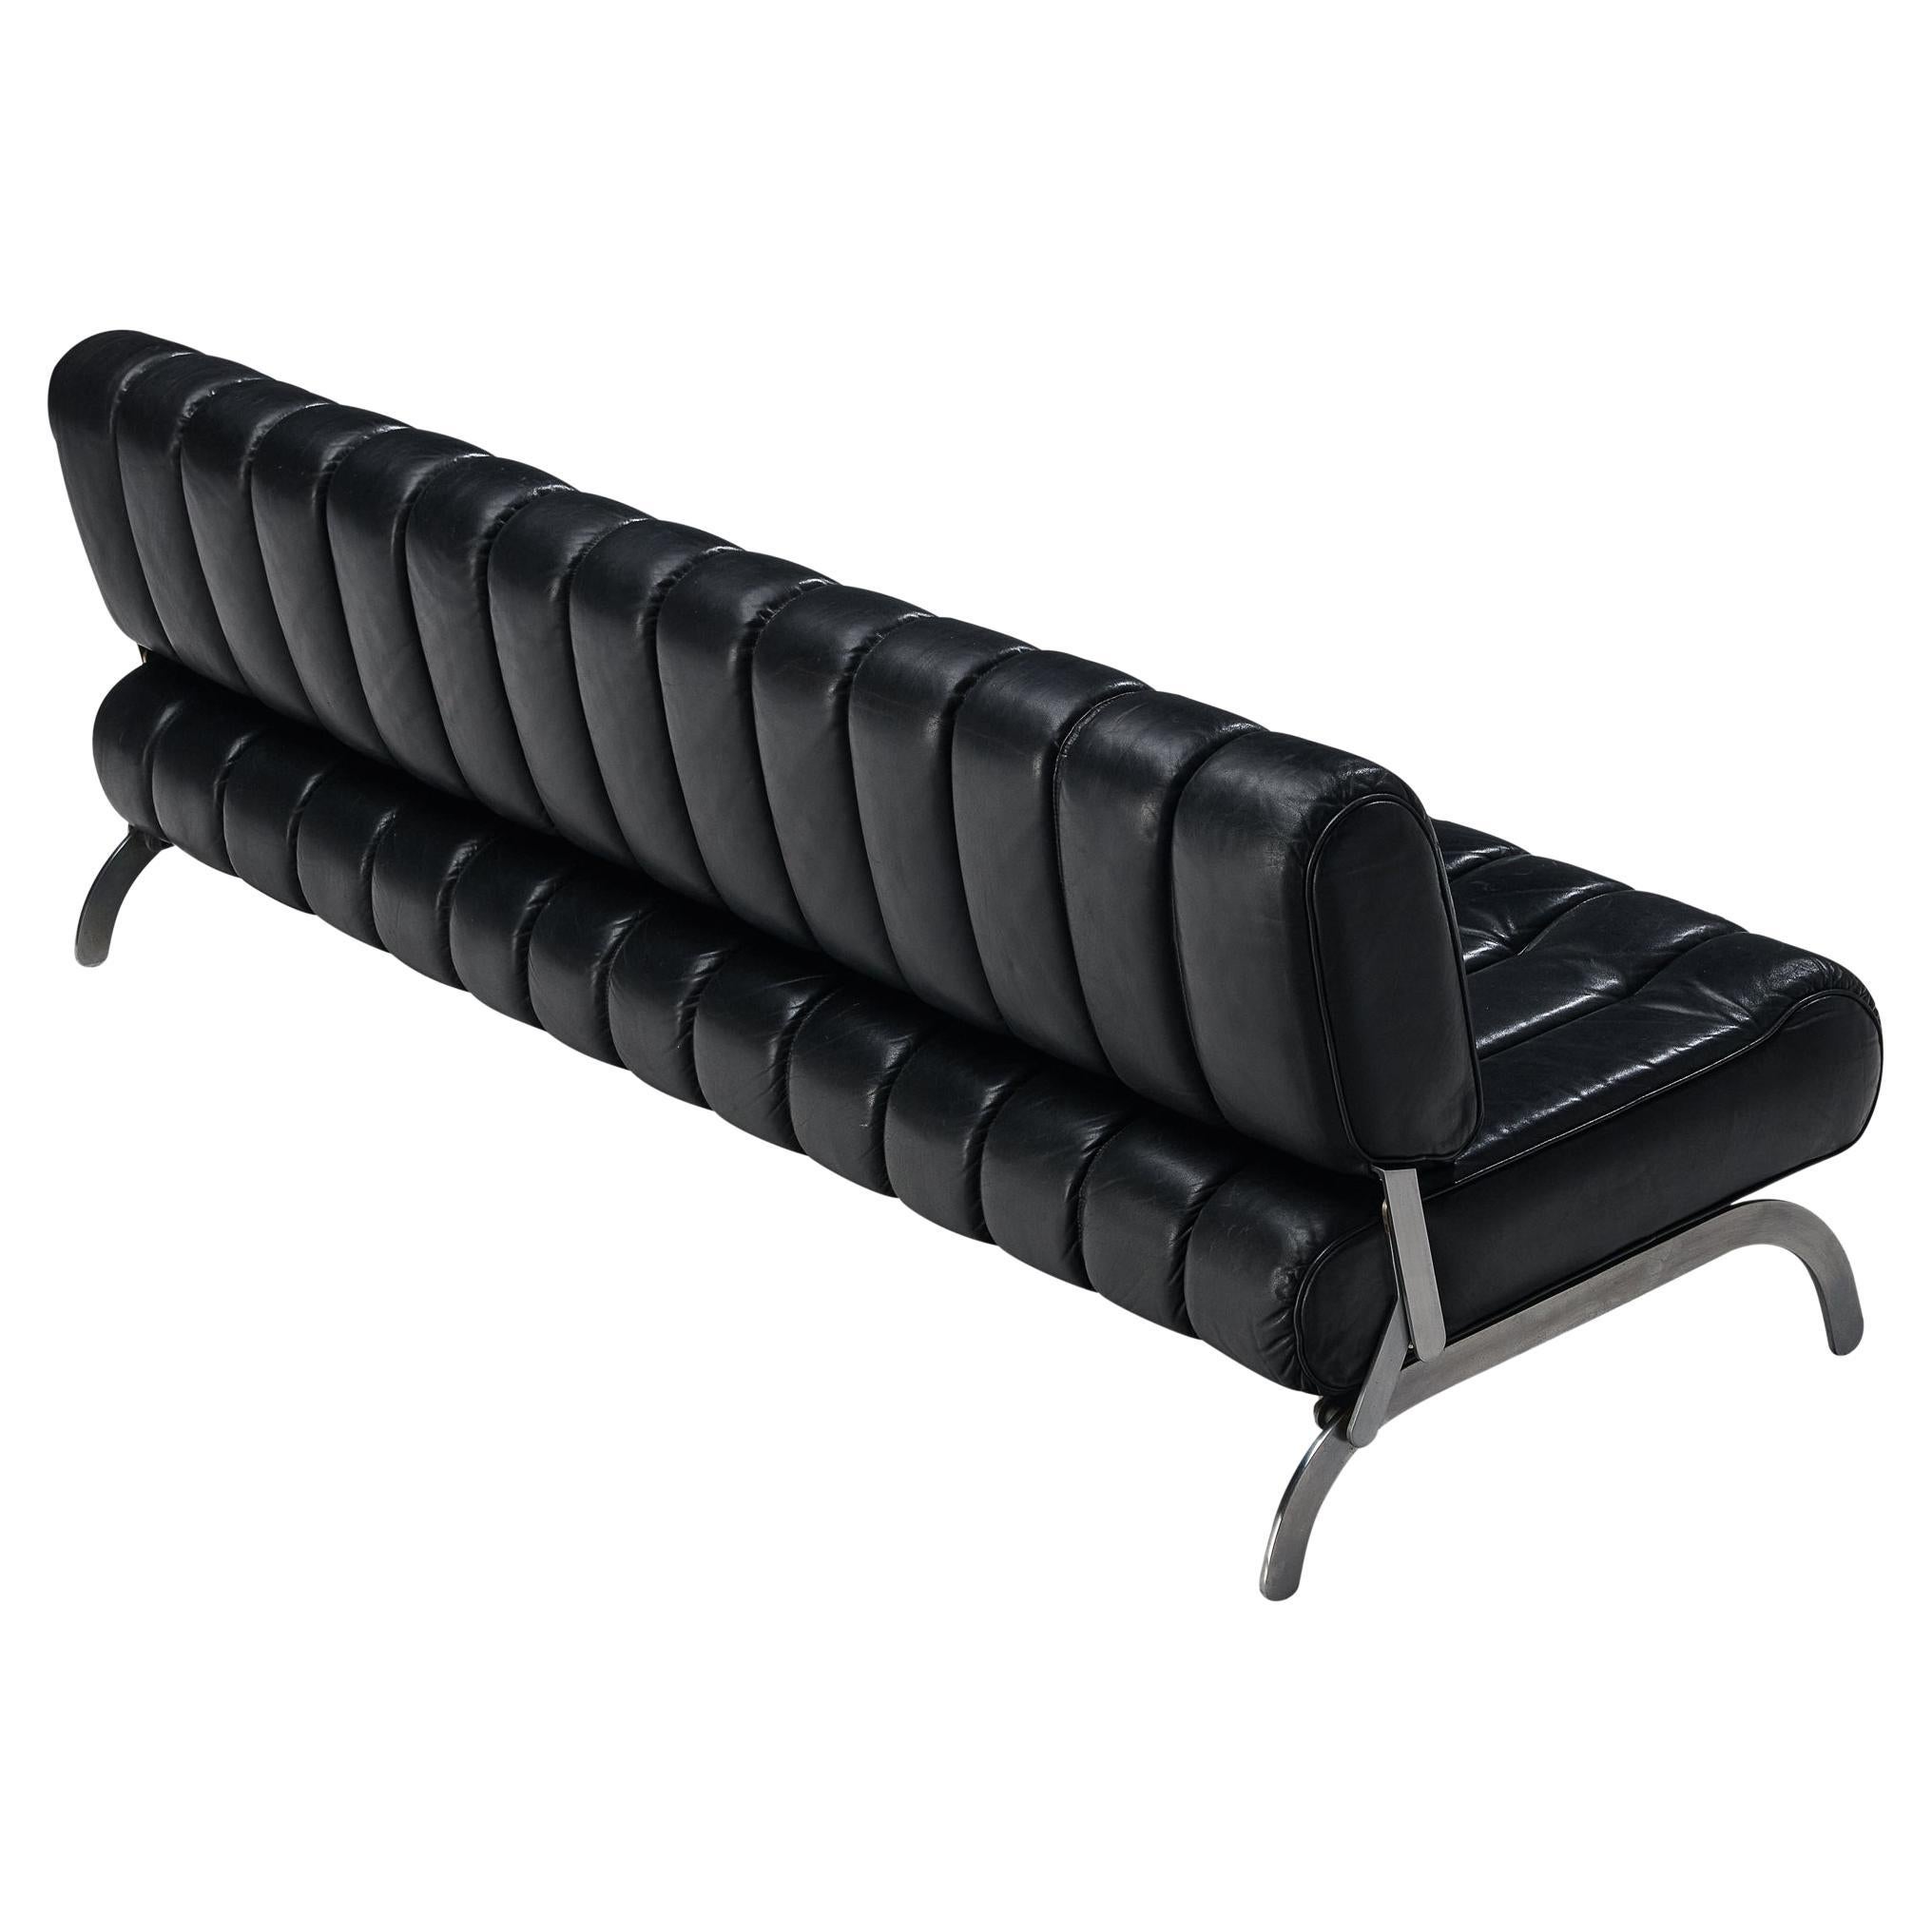 Karl Wittmann 'Independence' Sofa or Daybed in Metal and Black Leather